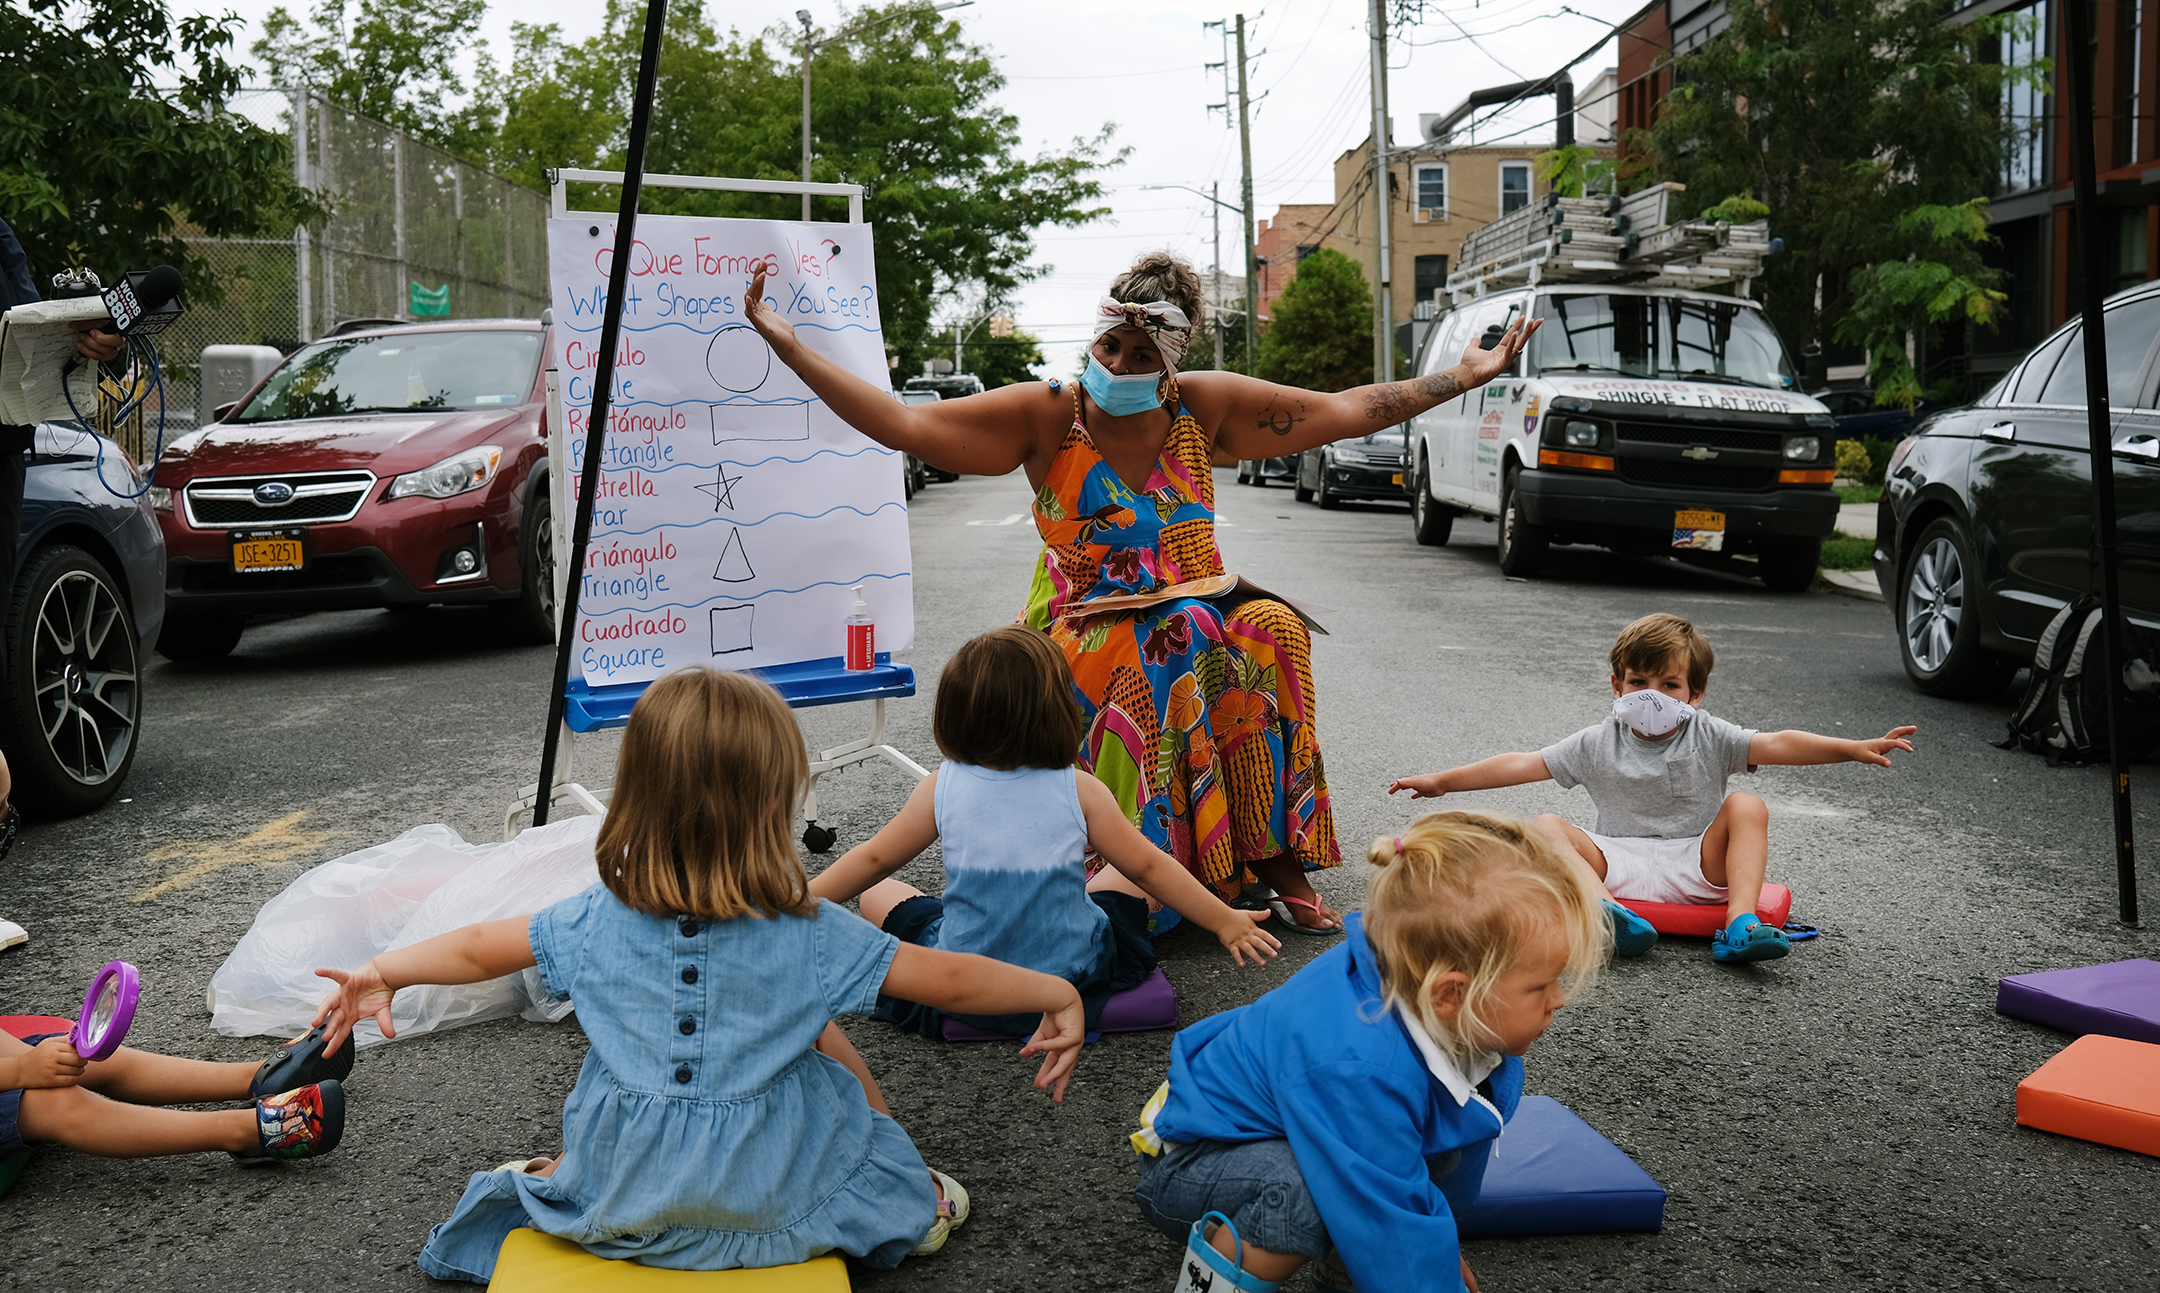 A teacher seated in front of six elementary school students conducts a lesson on the street in front of their school.